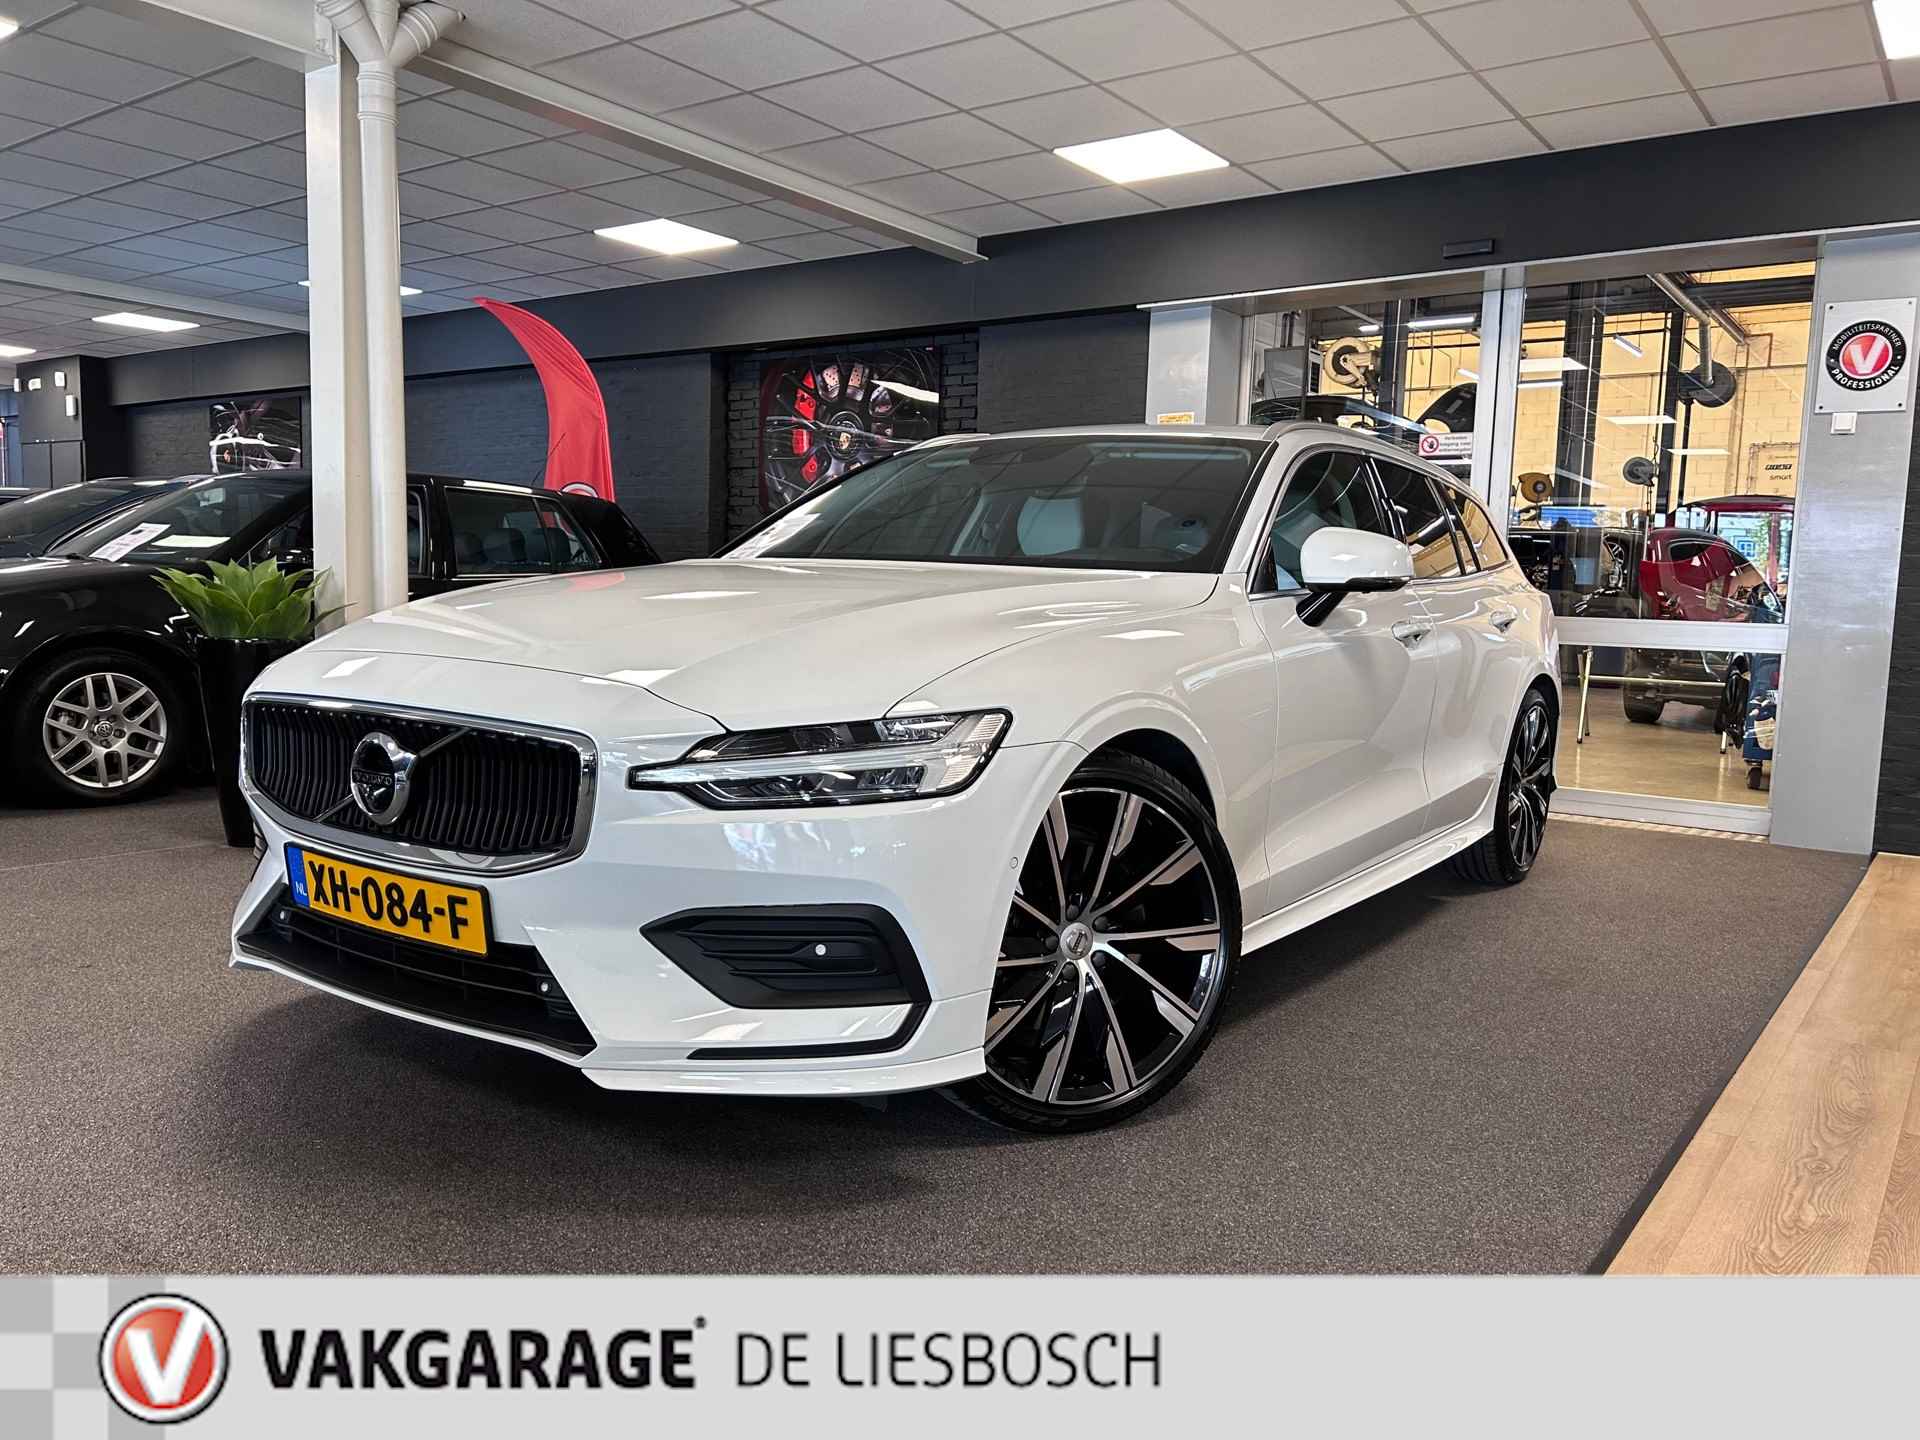 Volvo V60 2.0 T5 Momentum/Styling kit/Automaat/Led/20inch/360 camera - 3/34